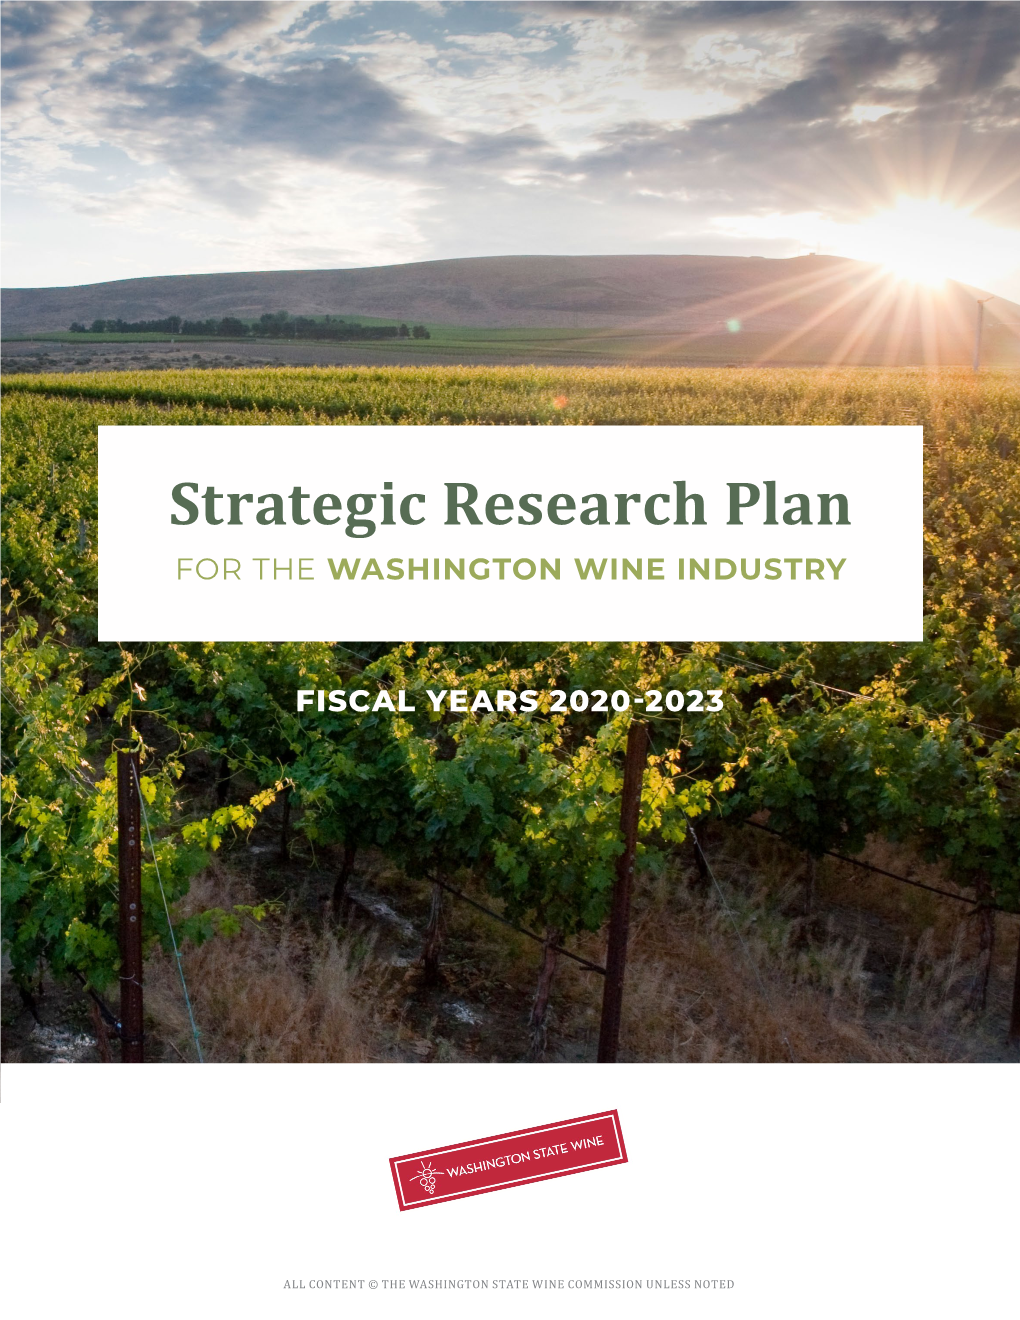 Strategic Research Plan for the WASHINGTON WINE INDUSTRY